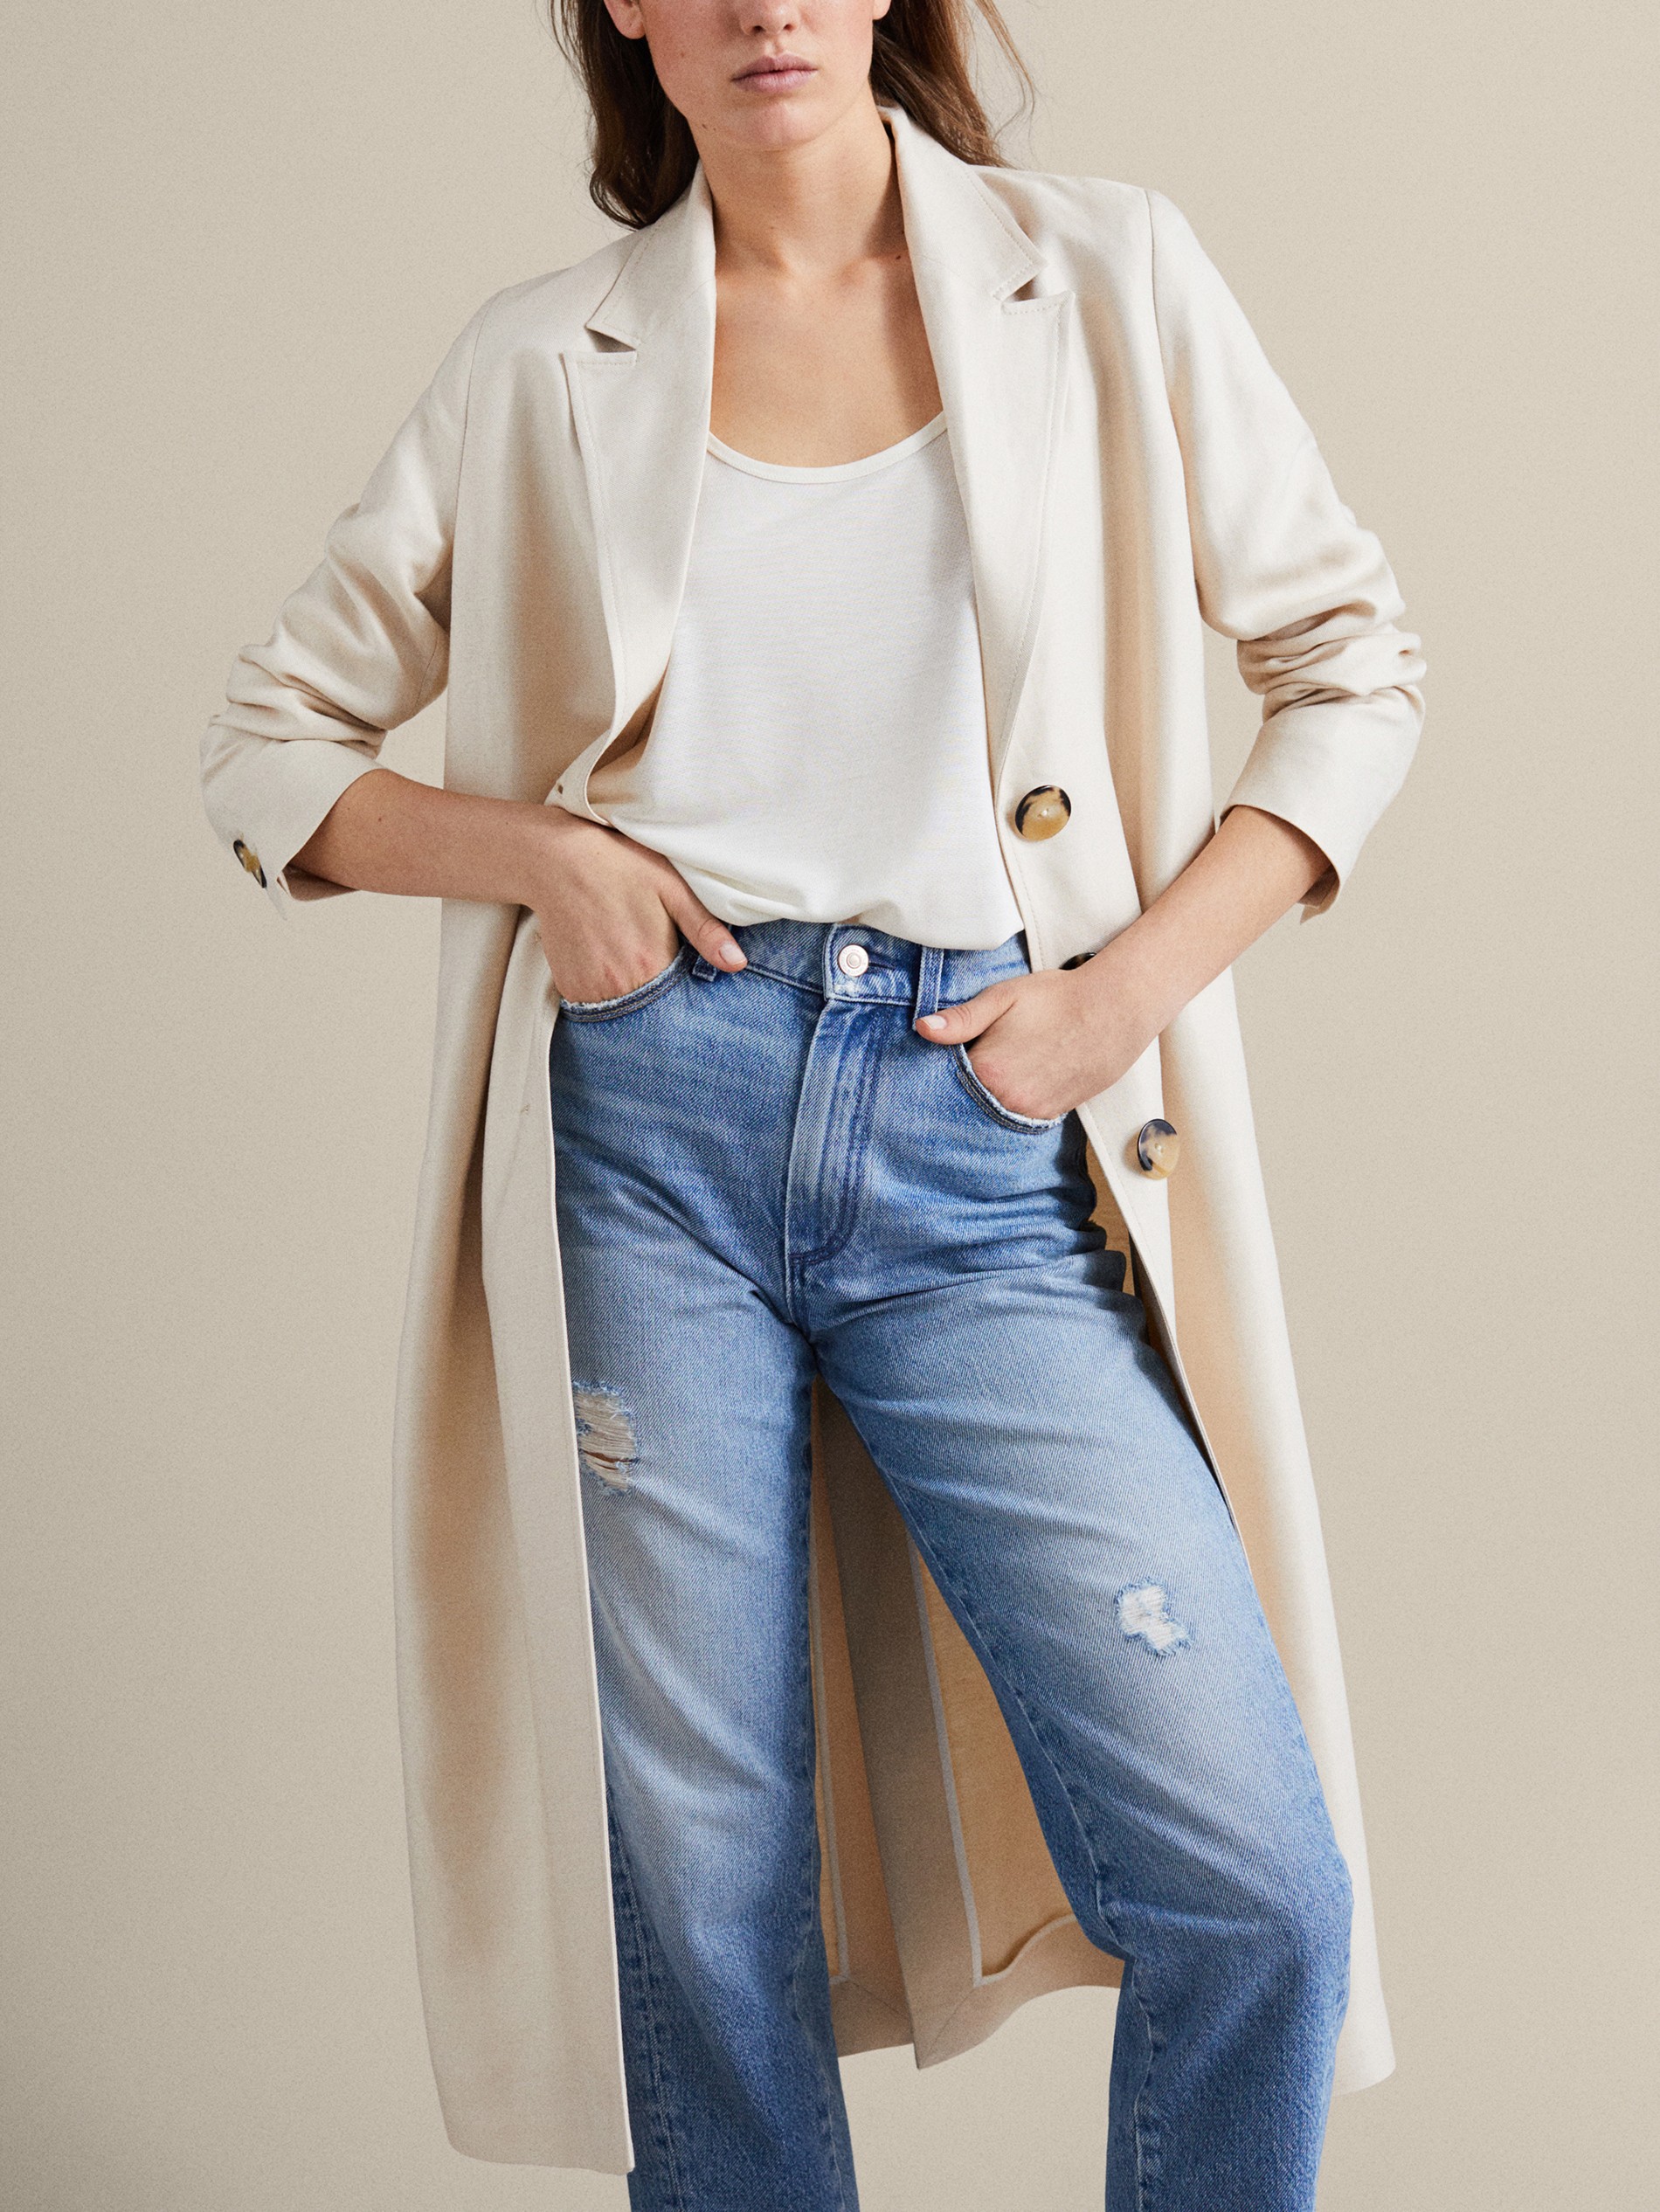 Massimo Dutti PLAIN LINEN TRENCH COAT at £139 | love the brands